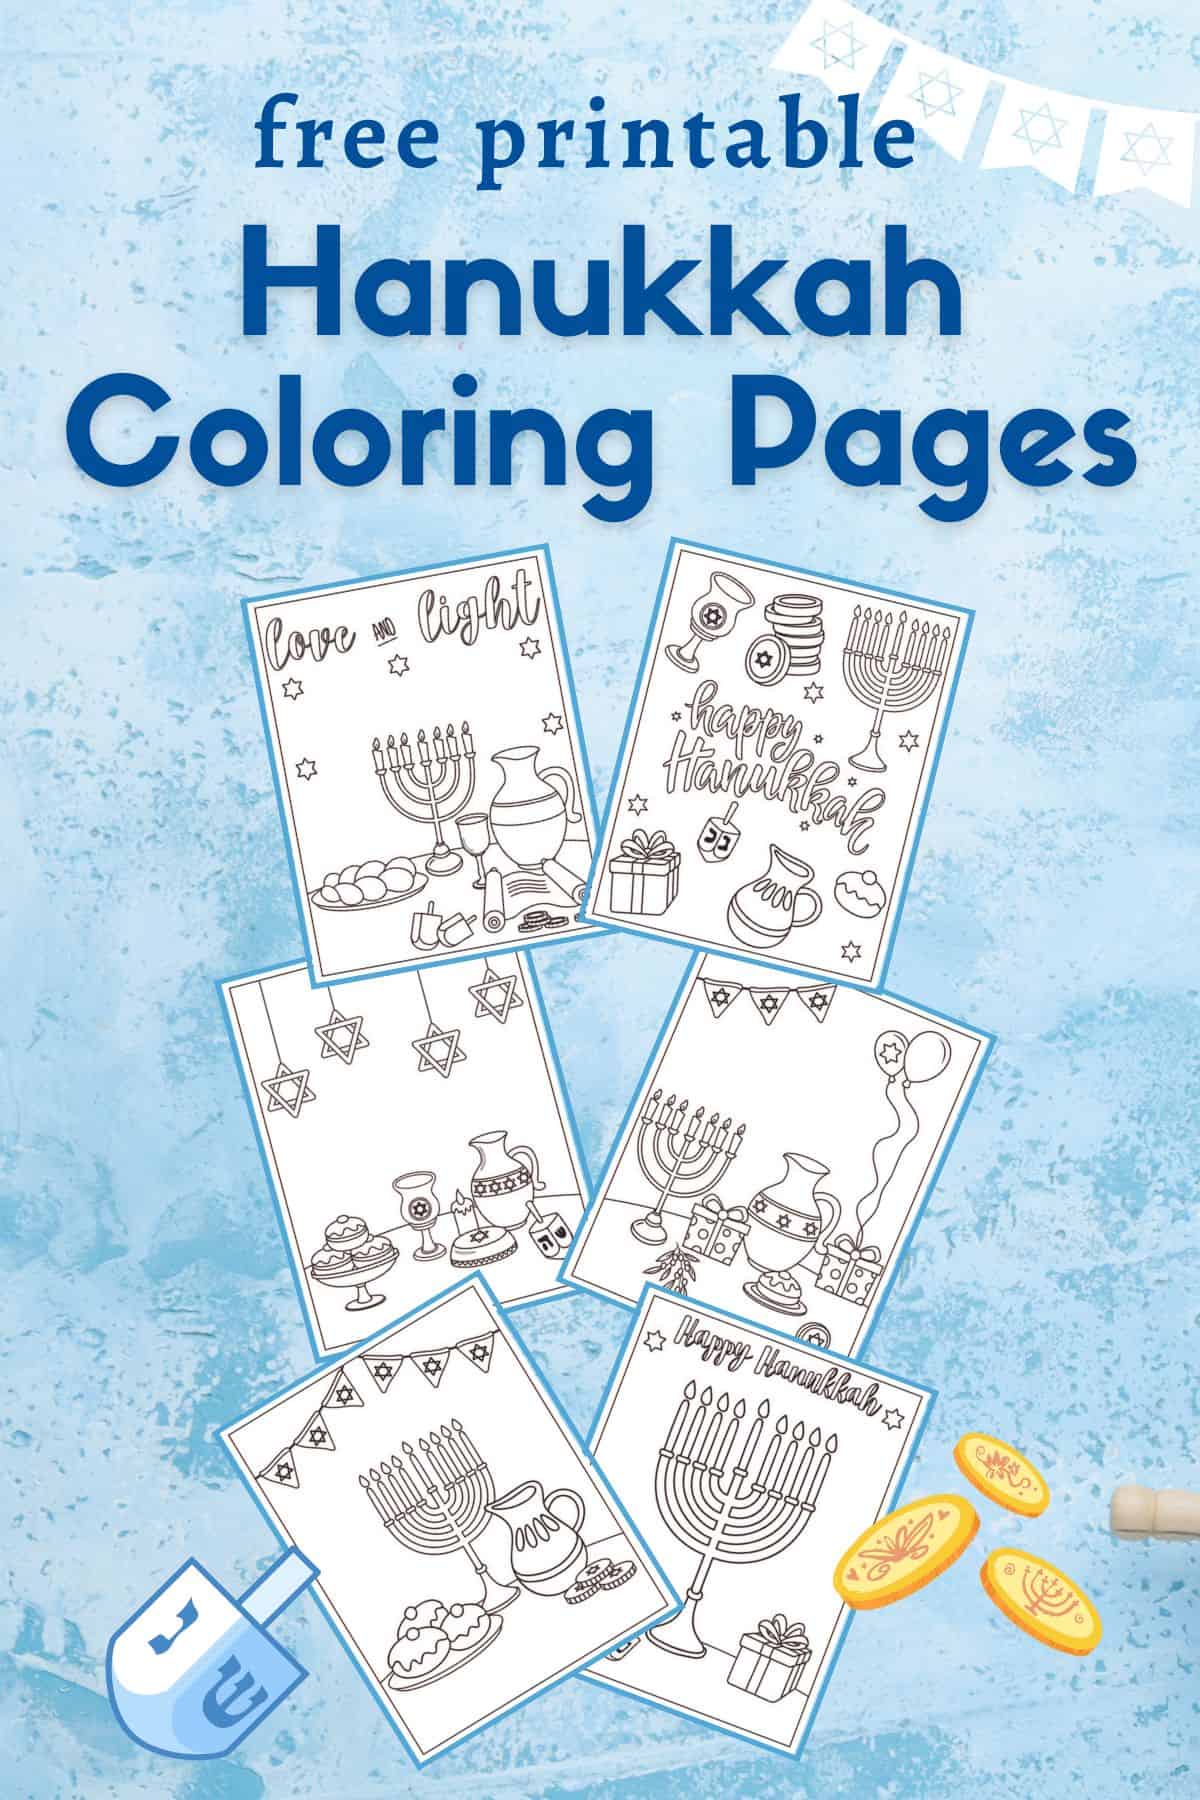 Pinterest image with text: free printable Hanukkah Coloring Pages